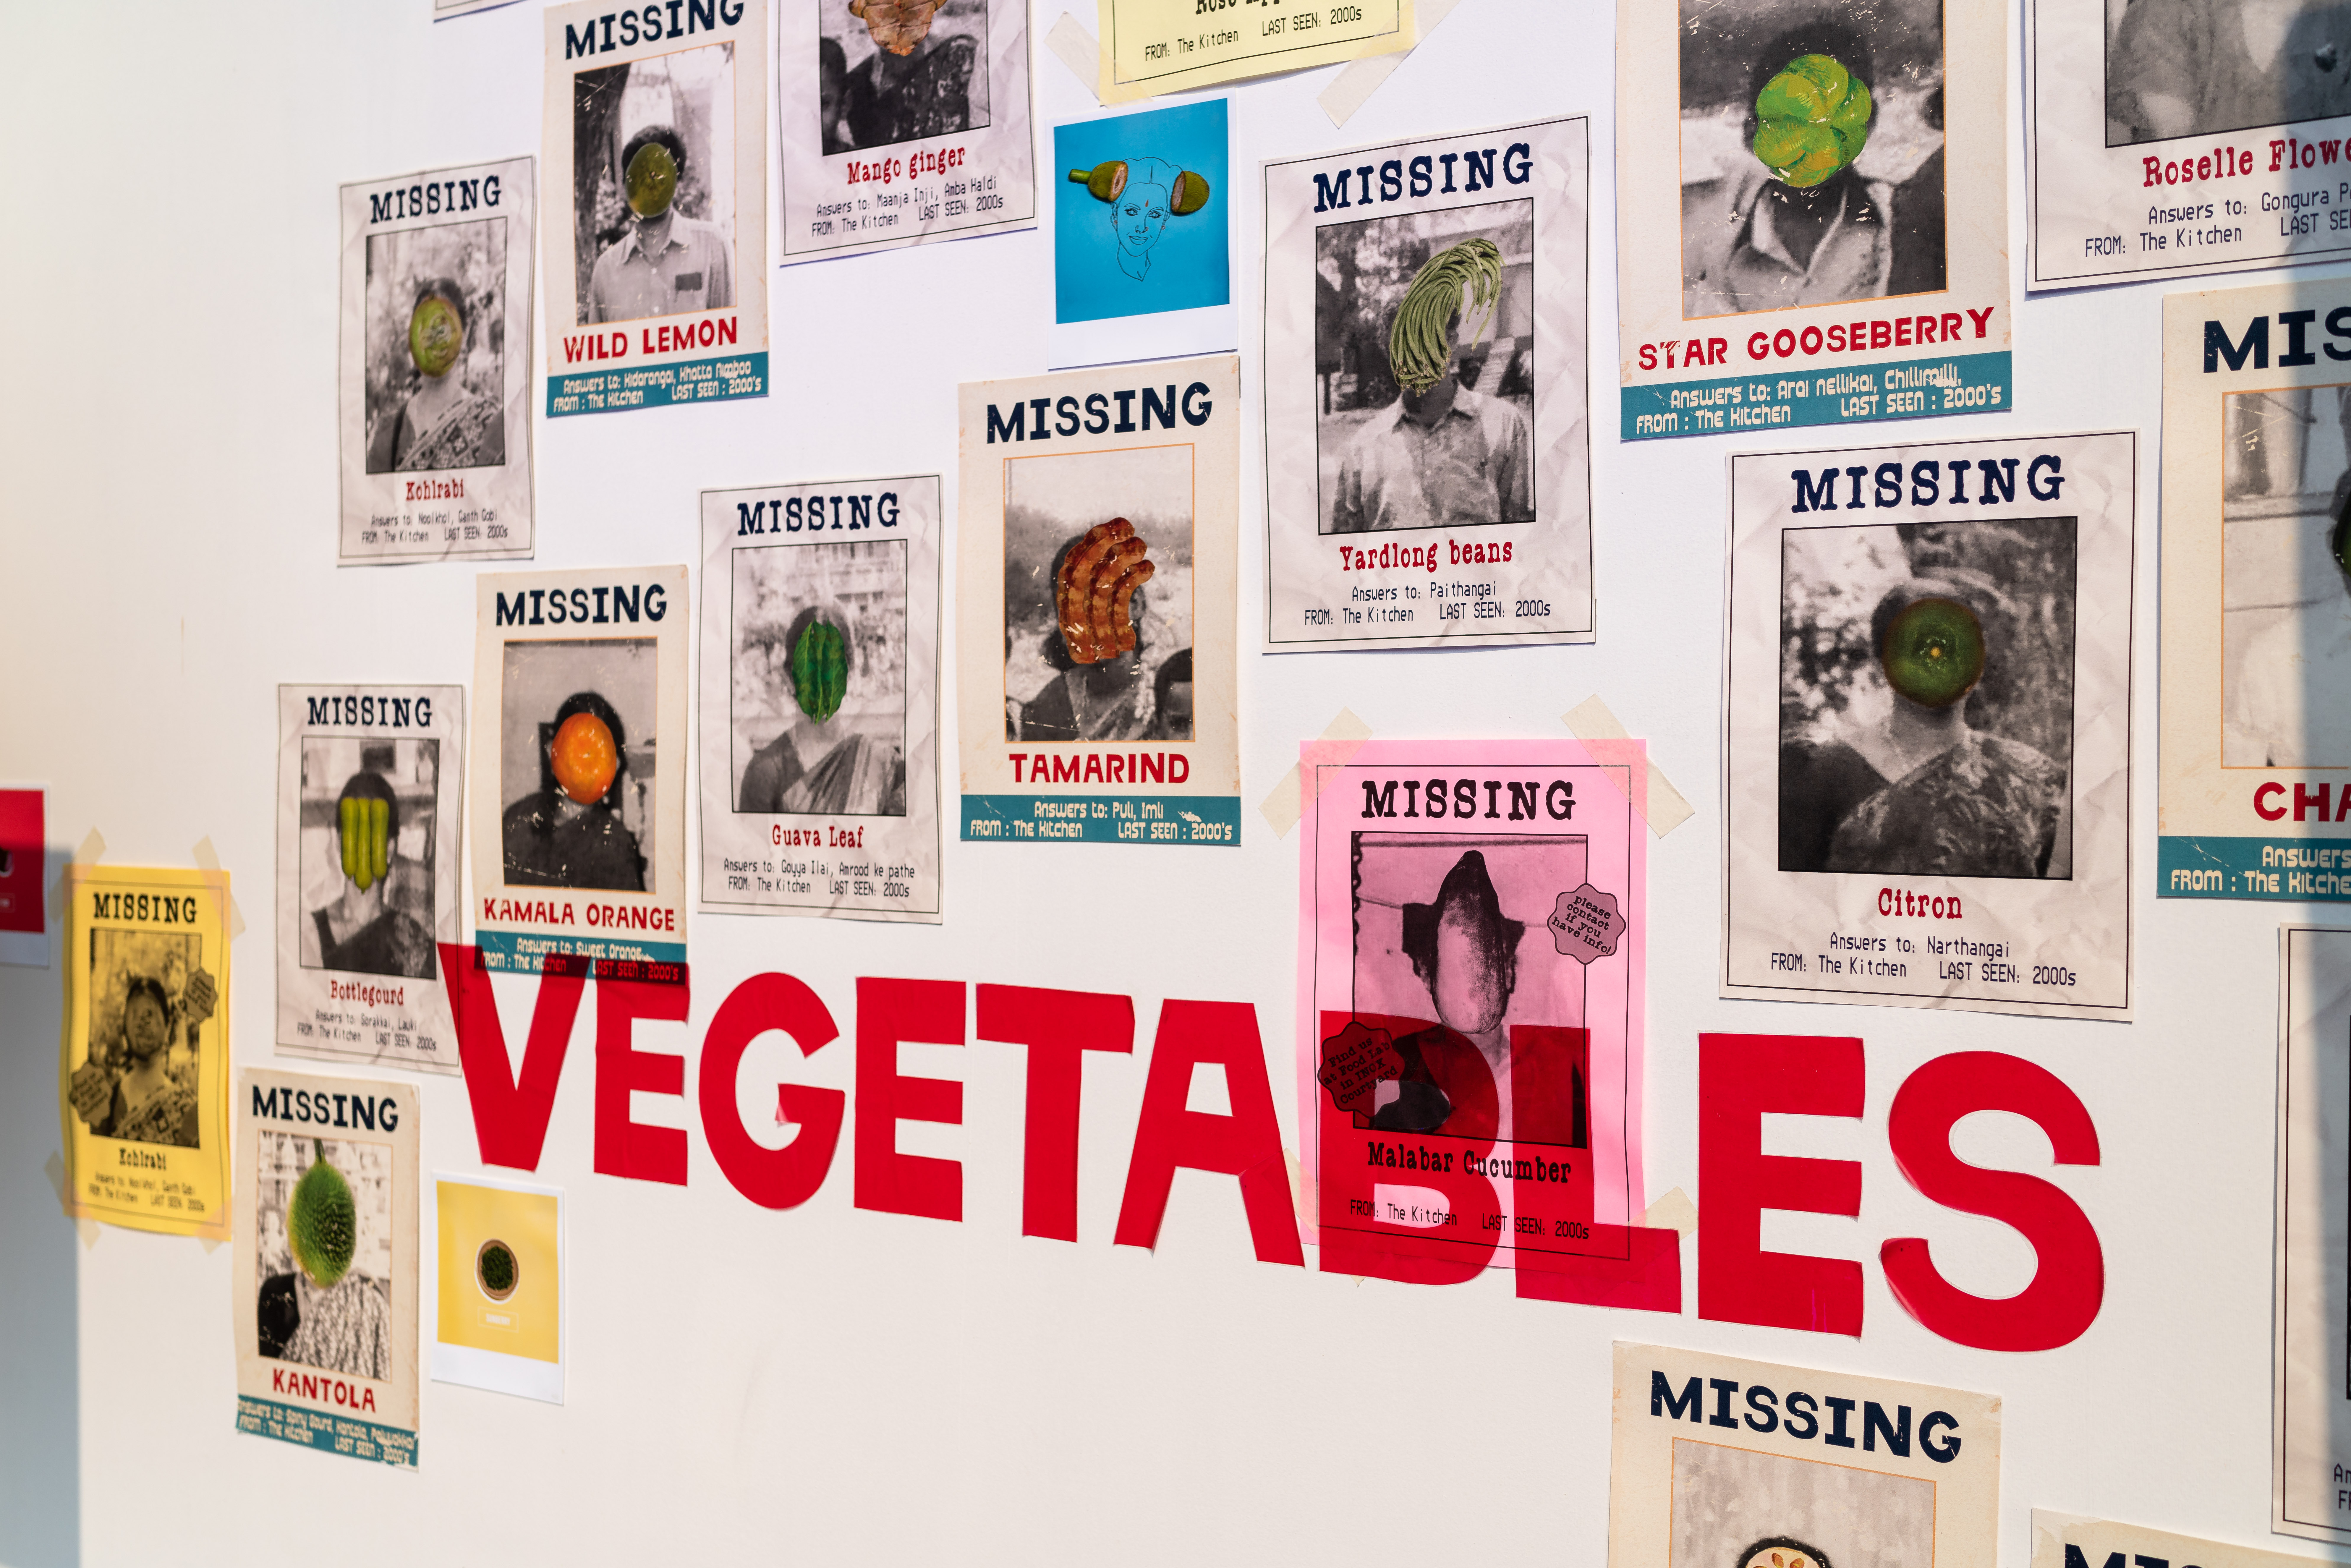 Image courtesy: The Case of Missing Vegetables at Serendipity Arts Festival 2022